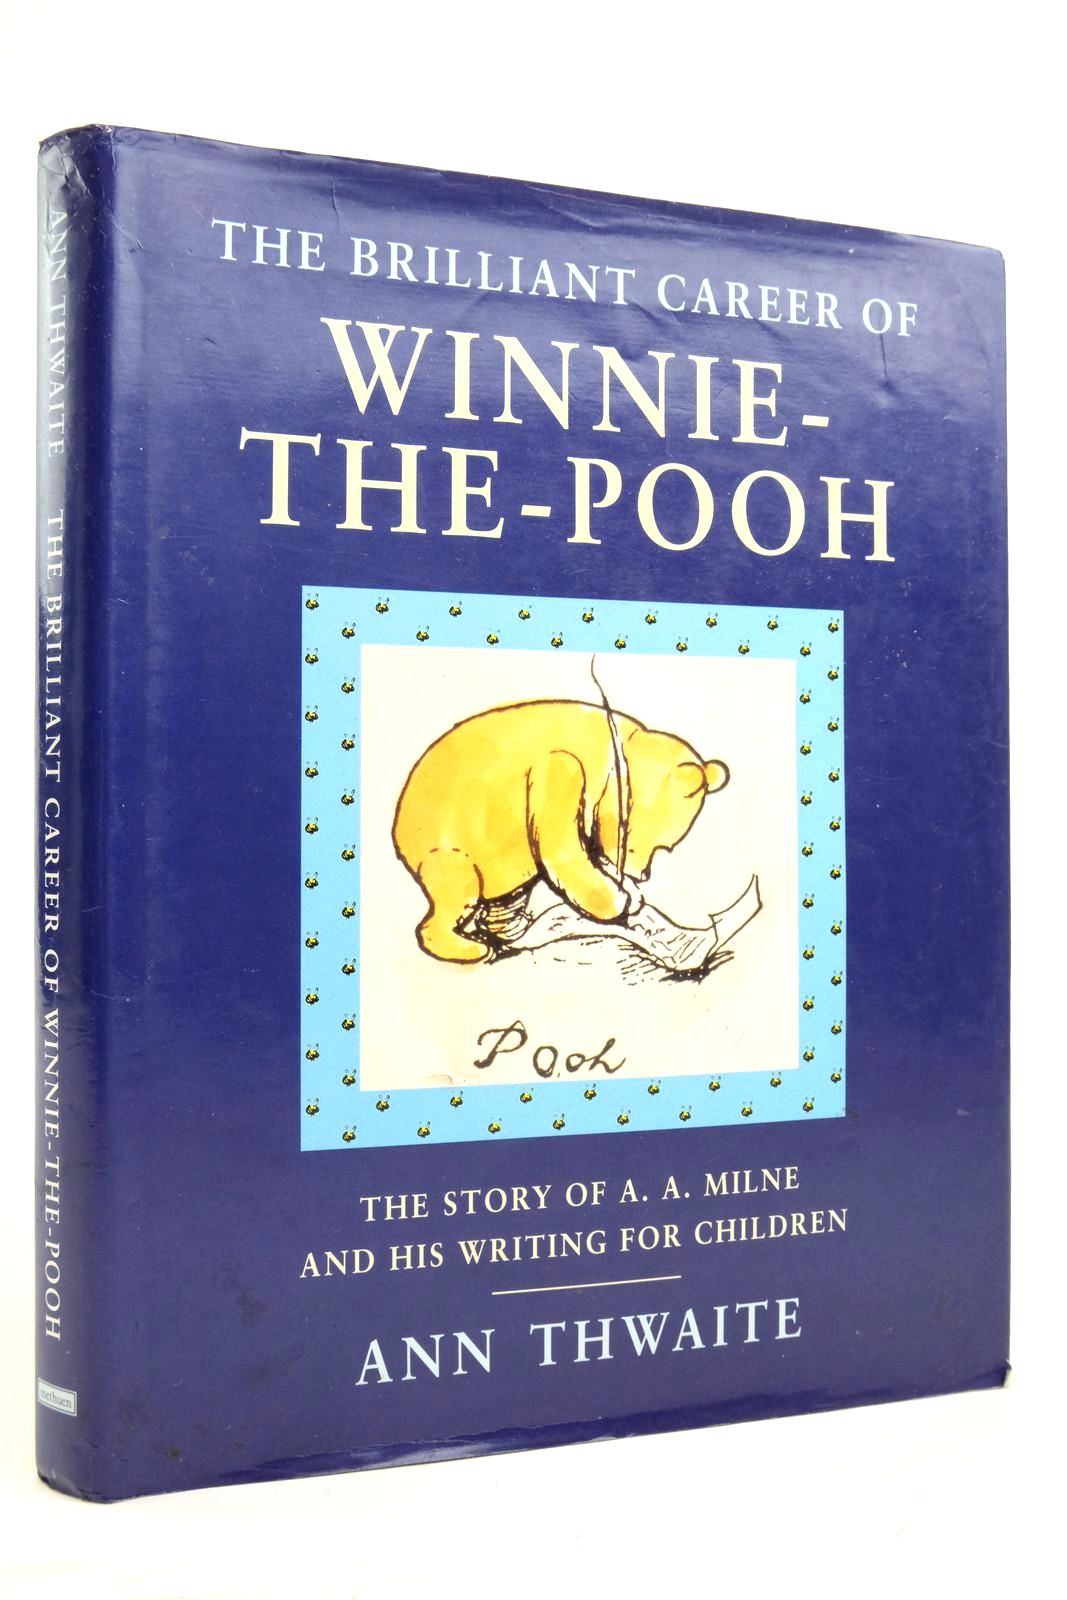 Photo of THE BRILLIANT CAREER OF WINNIE-THE-POOH written by Milne, A.A. Thwaite, Ann illustrated by Shepard, E.H. published by Methuen &amp; Co. Ltd. (STOCK CODE: 2136847)  for sale by Stella & Rose's Books